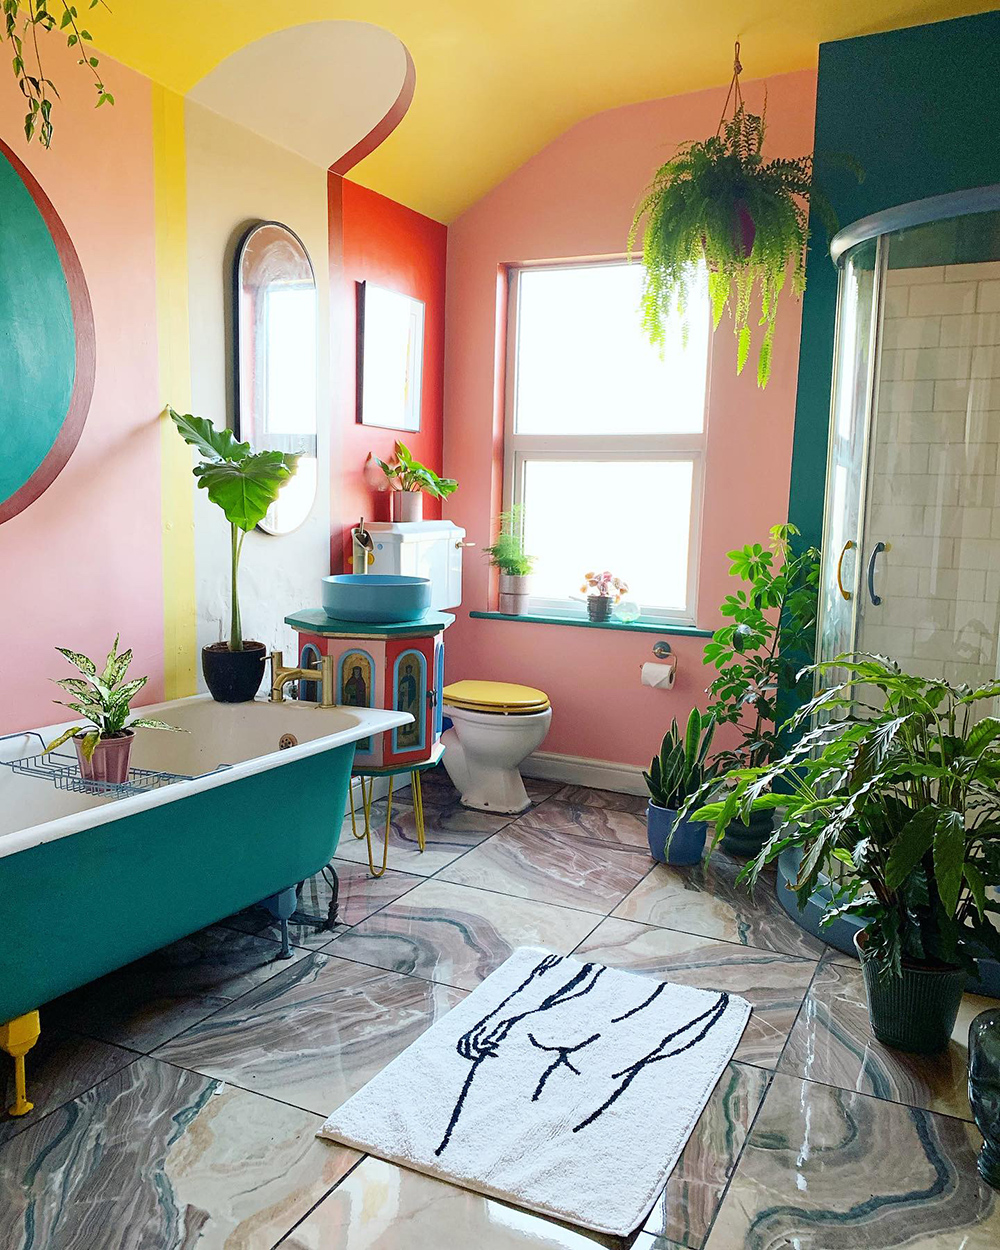 Colourful interiors inspiration - paint effects and colour blocking used to create a statement bathroom 